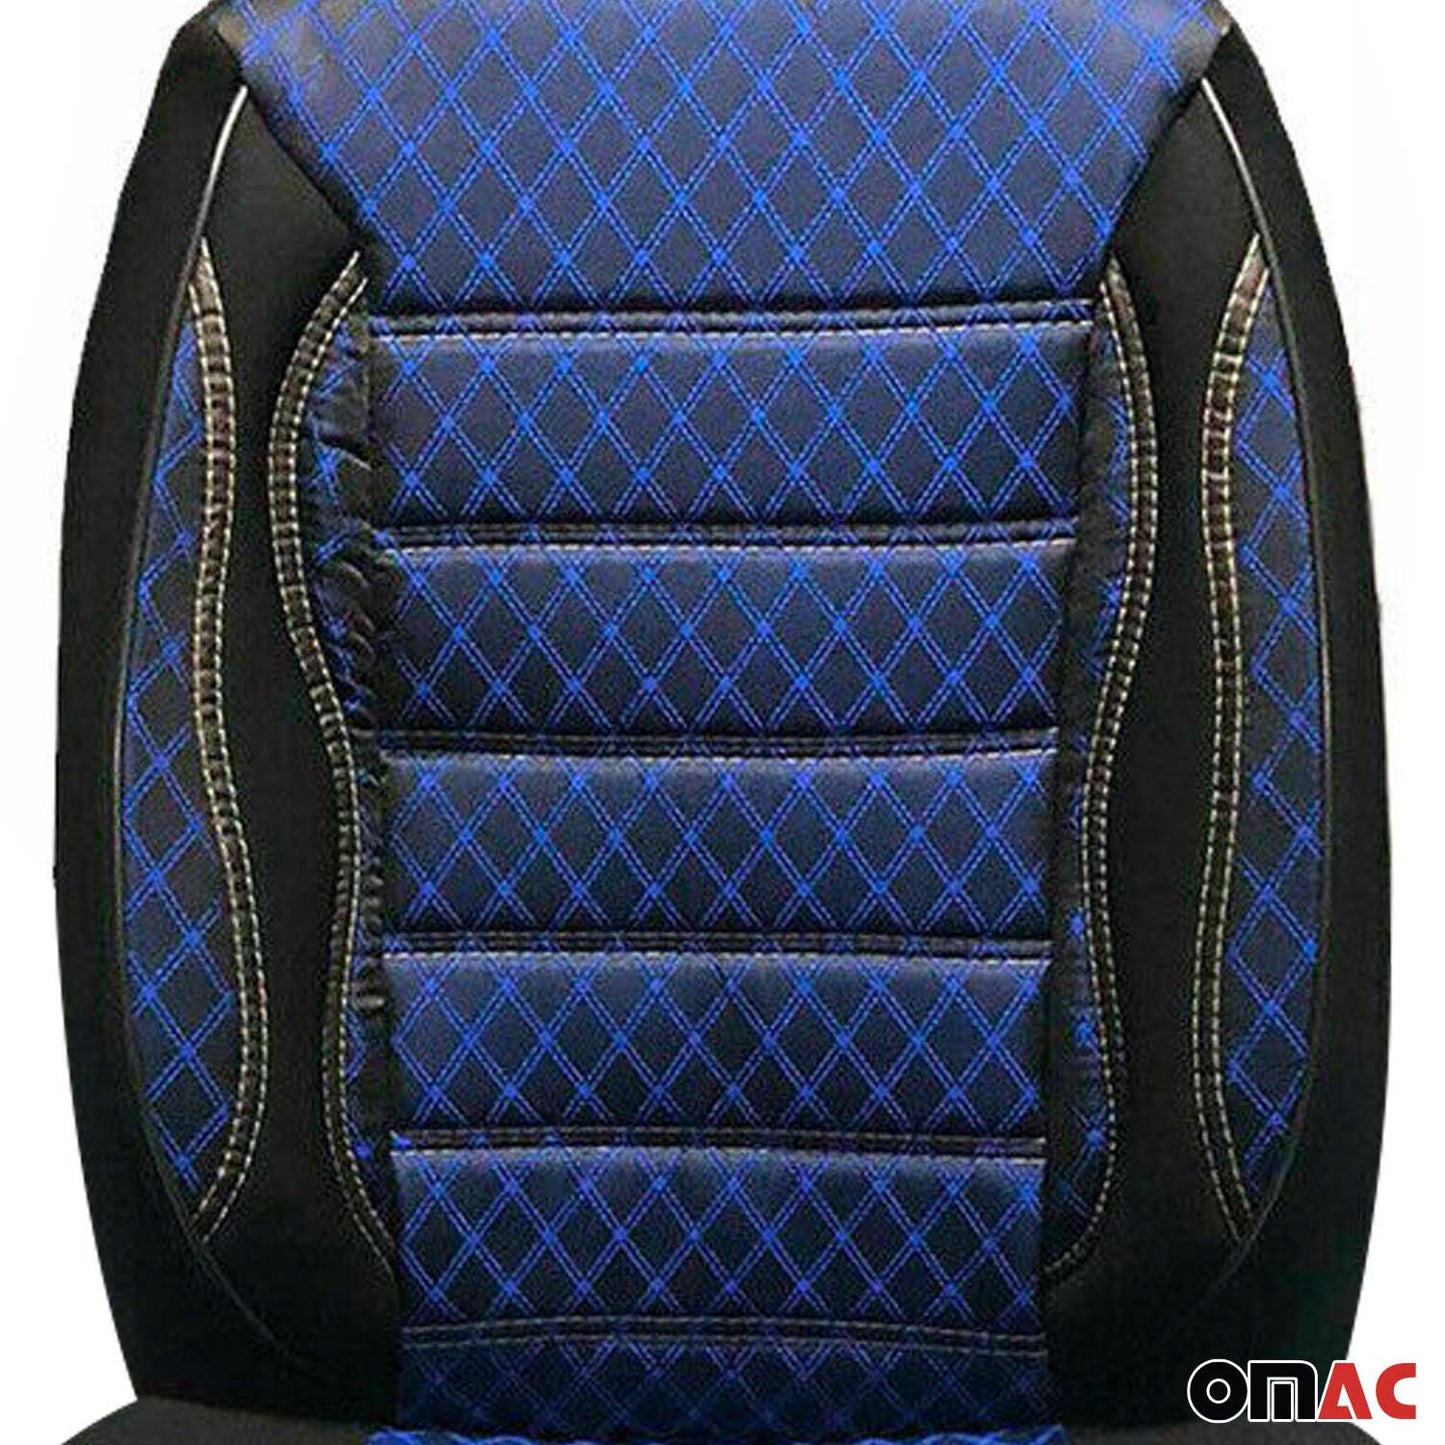 OMAC Front Car Seat Covers for RAM Promaster City 2015-2022 Black & Blue 2+1 A011821